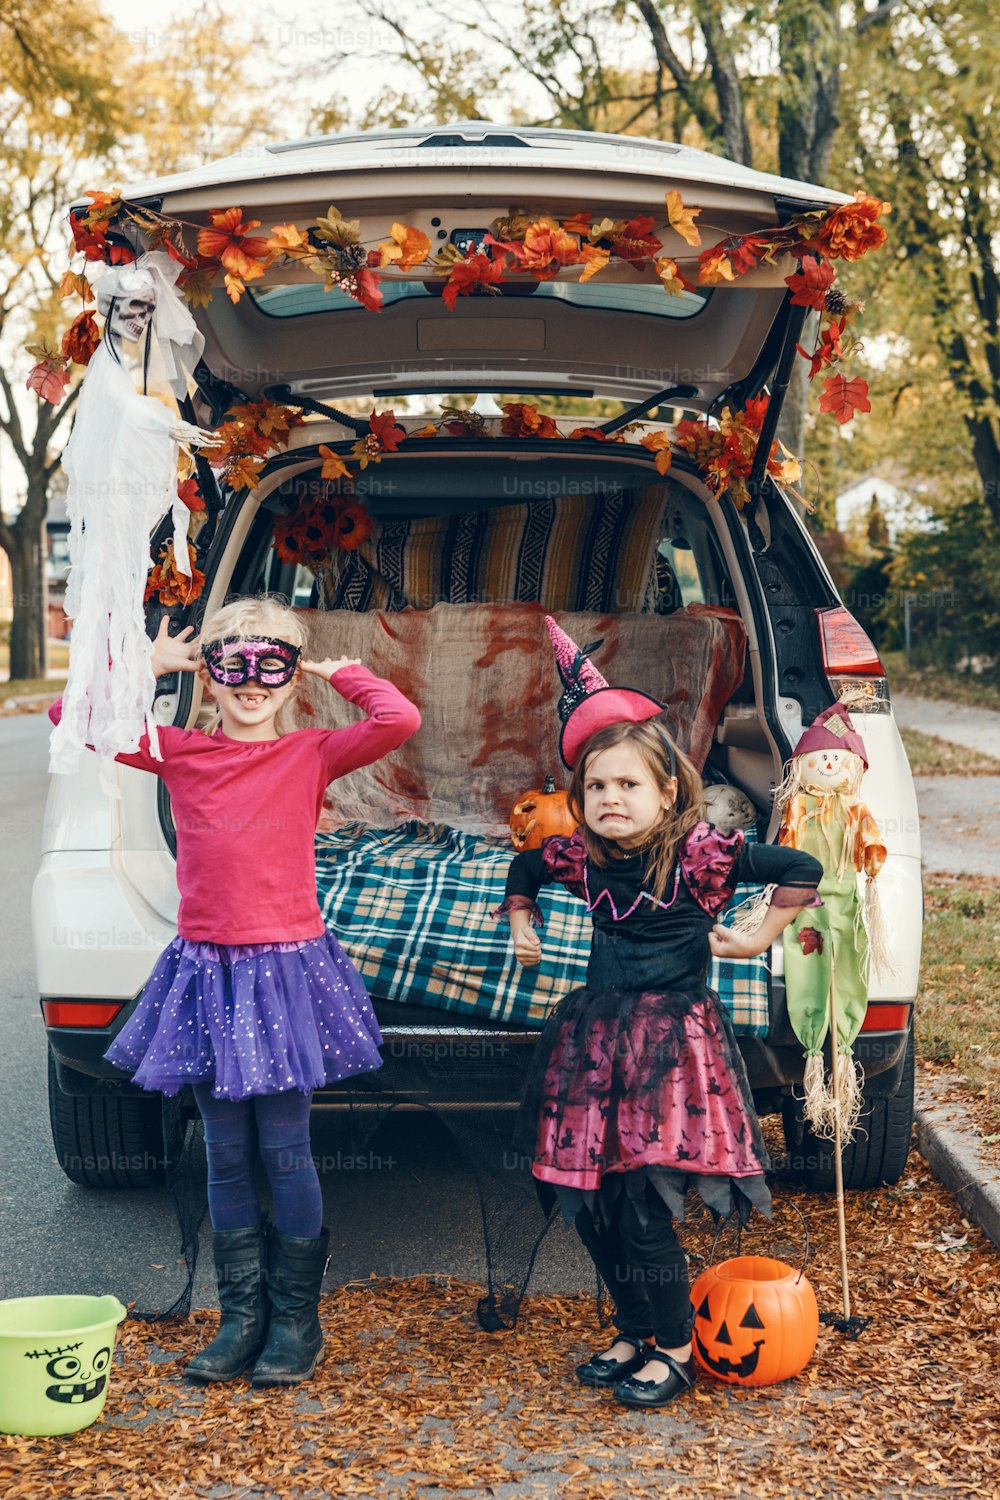 Trick or trunk. Children siblings sisters celebrating Halloween in trunk of car. Friends kids girls preparing for October holiday outdoor. Social distance and safe alternative celebration.